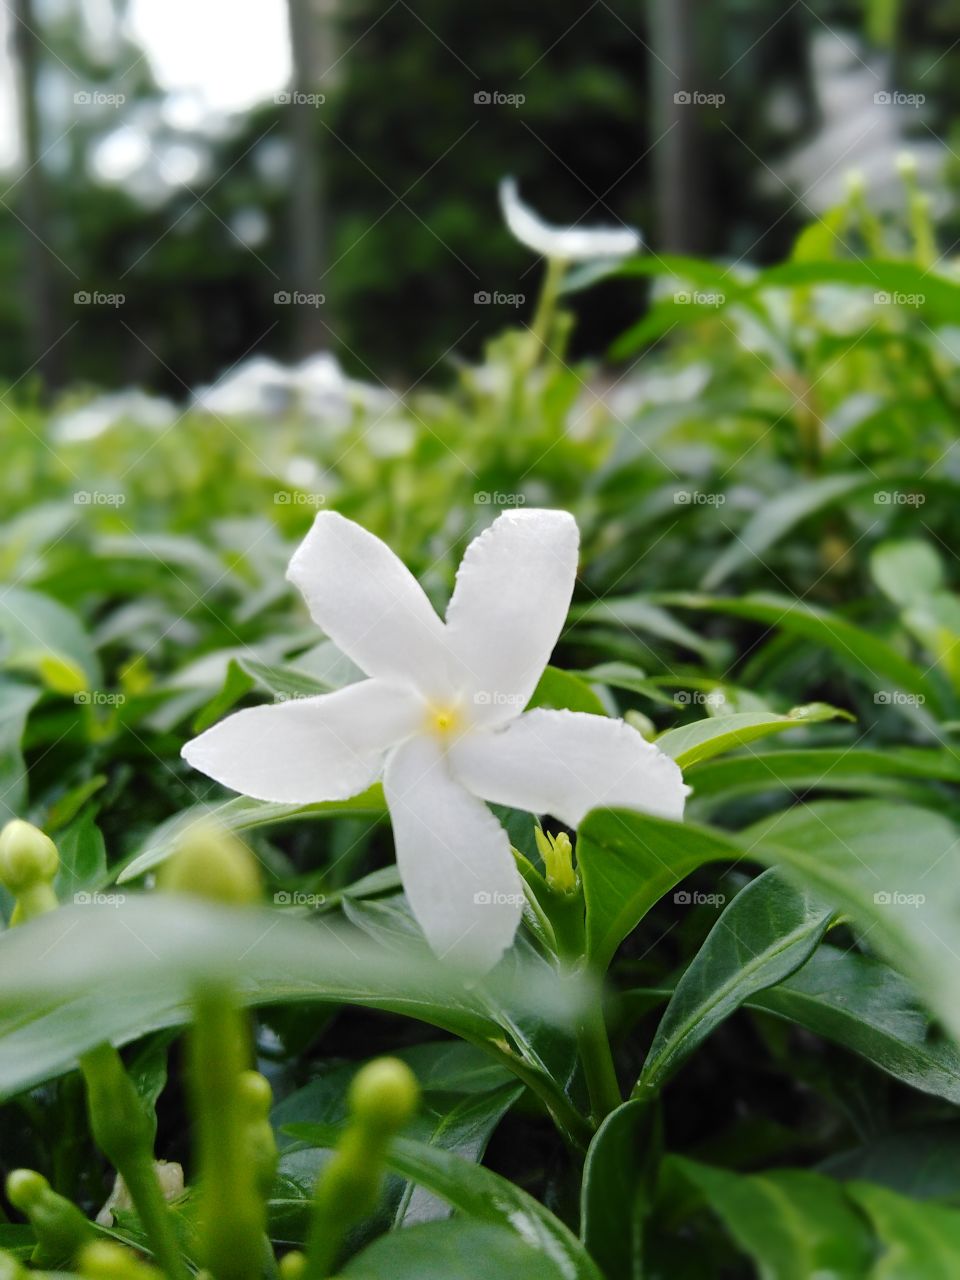 Focusing on one of the tiny white flower among the green leaves.